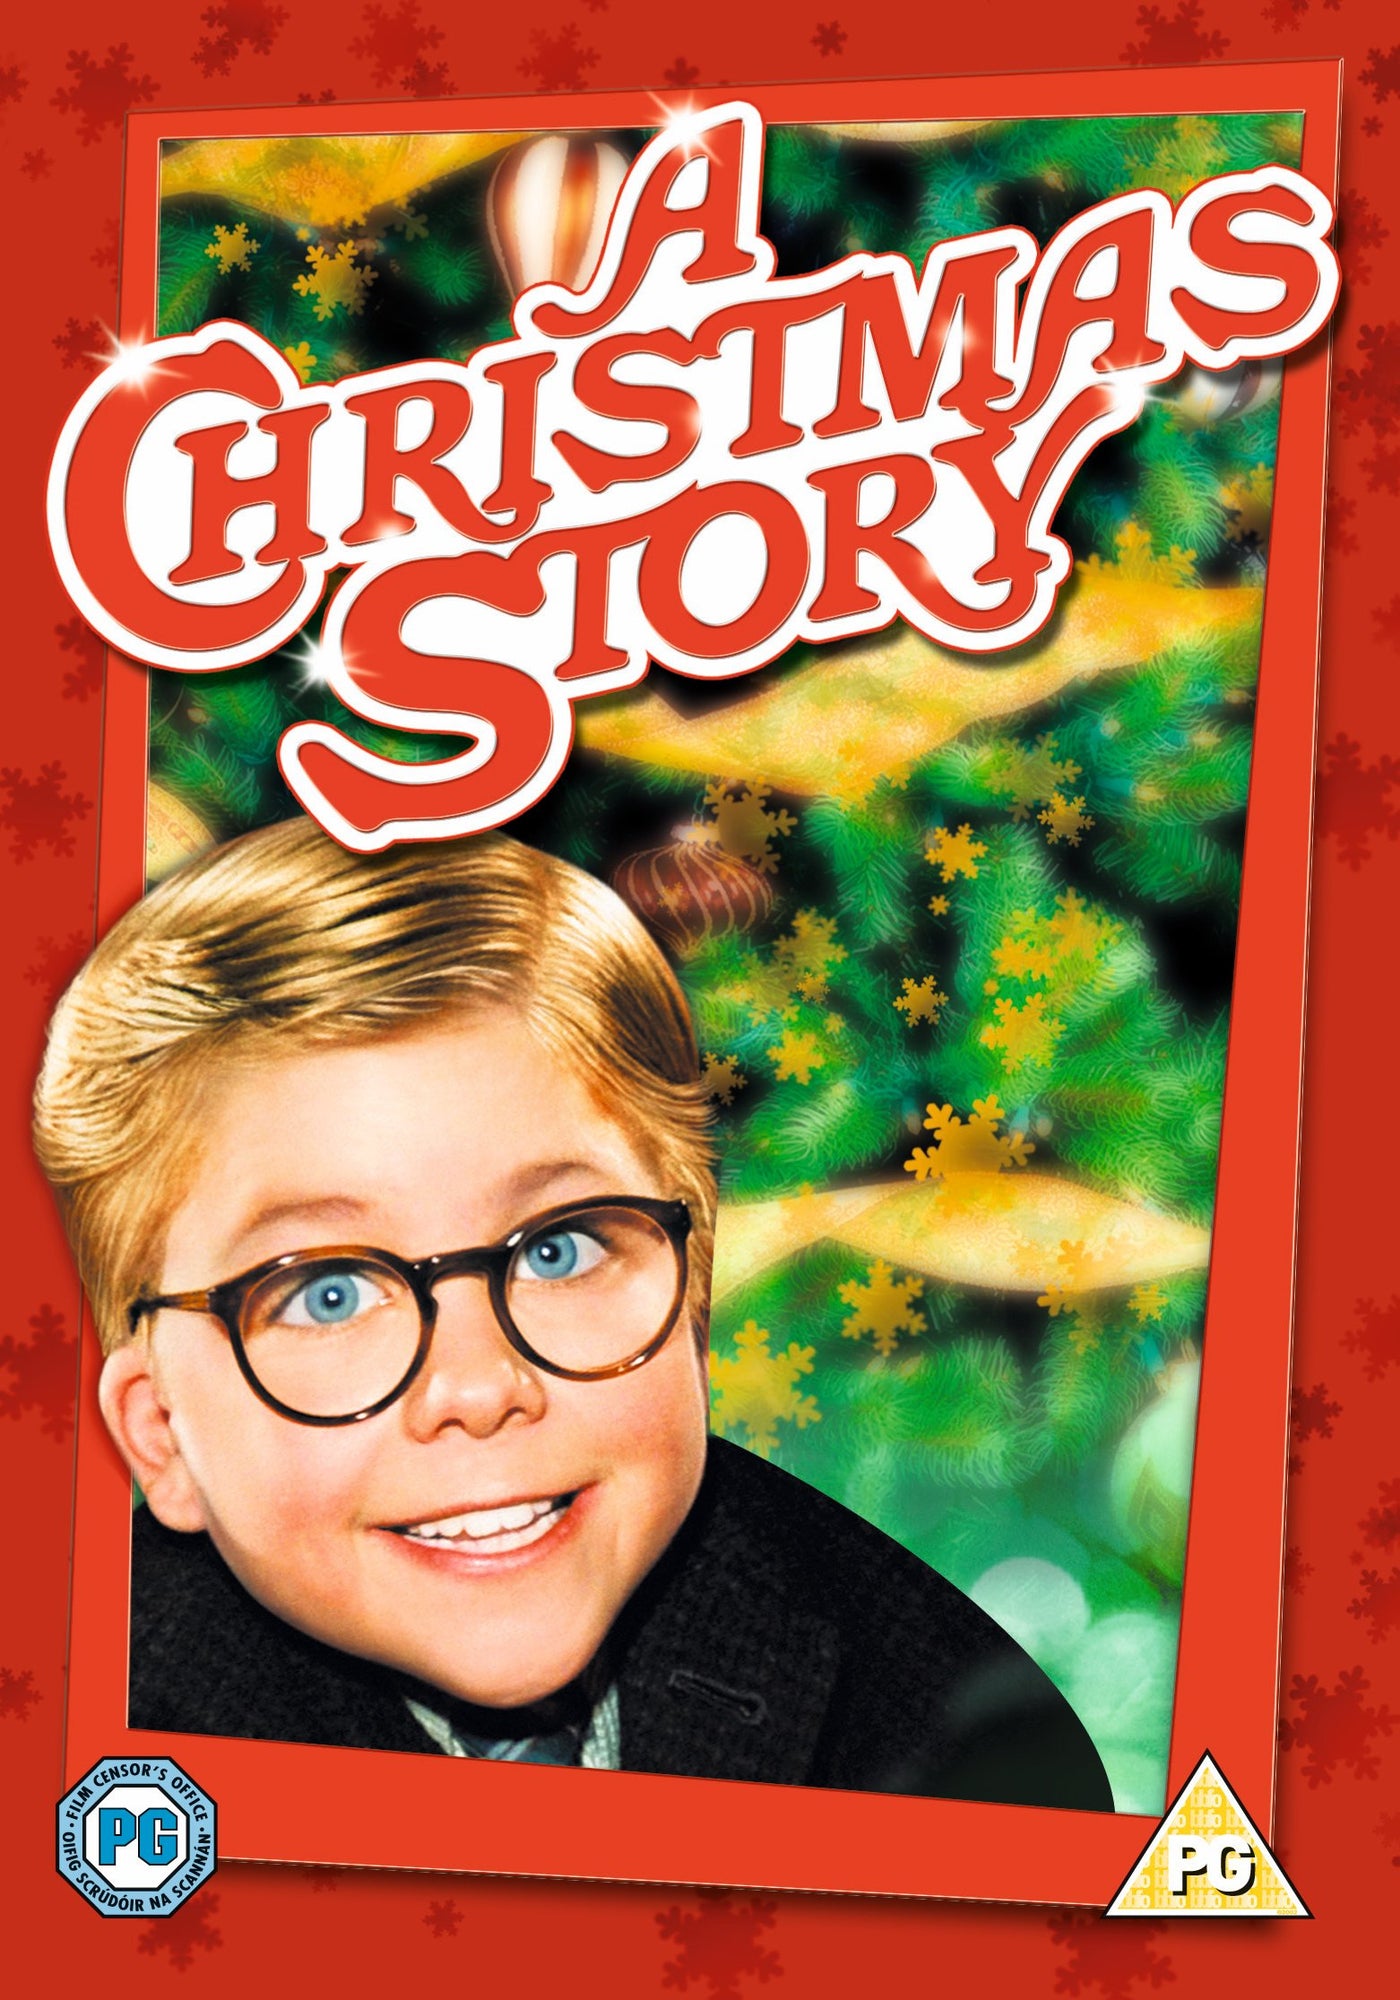 a christmas story 1983 vhs